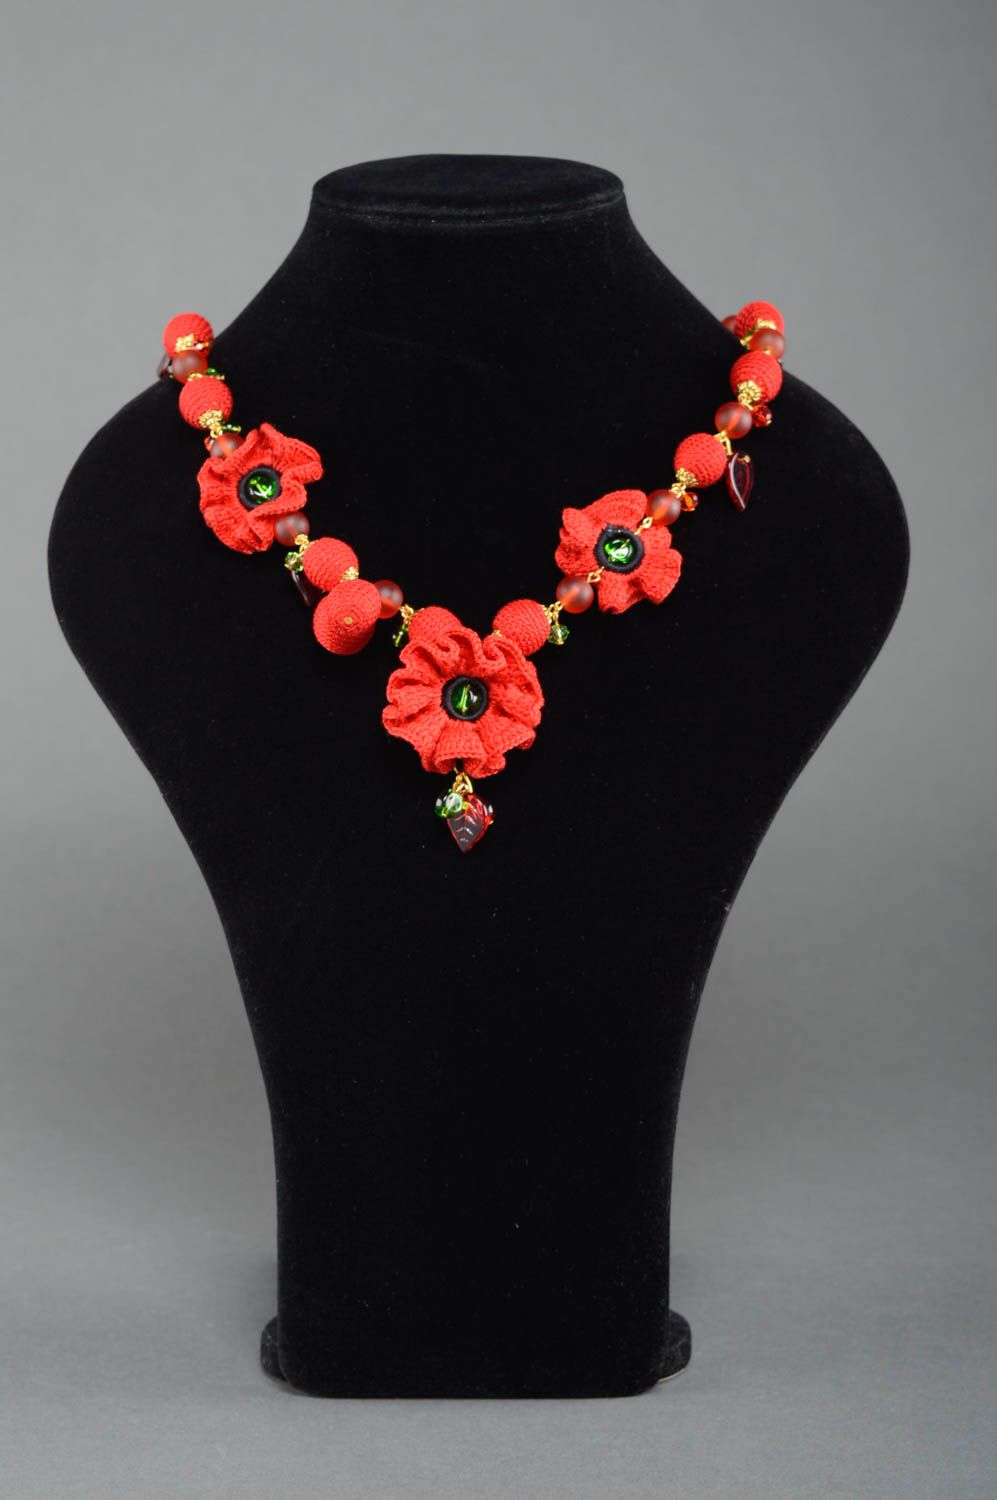 Necklace with beads and crochet flowers red poppies photo 2